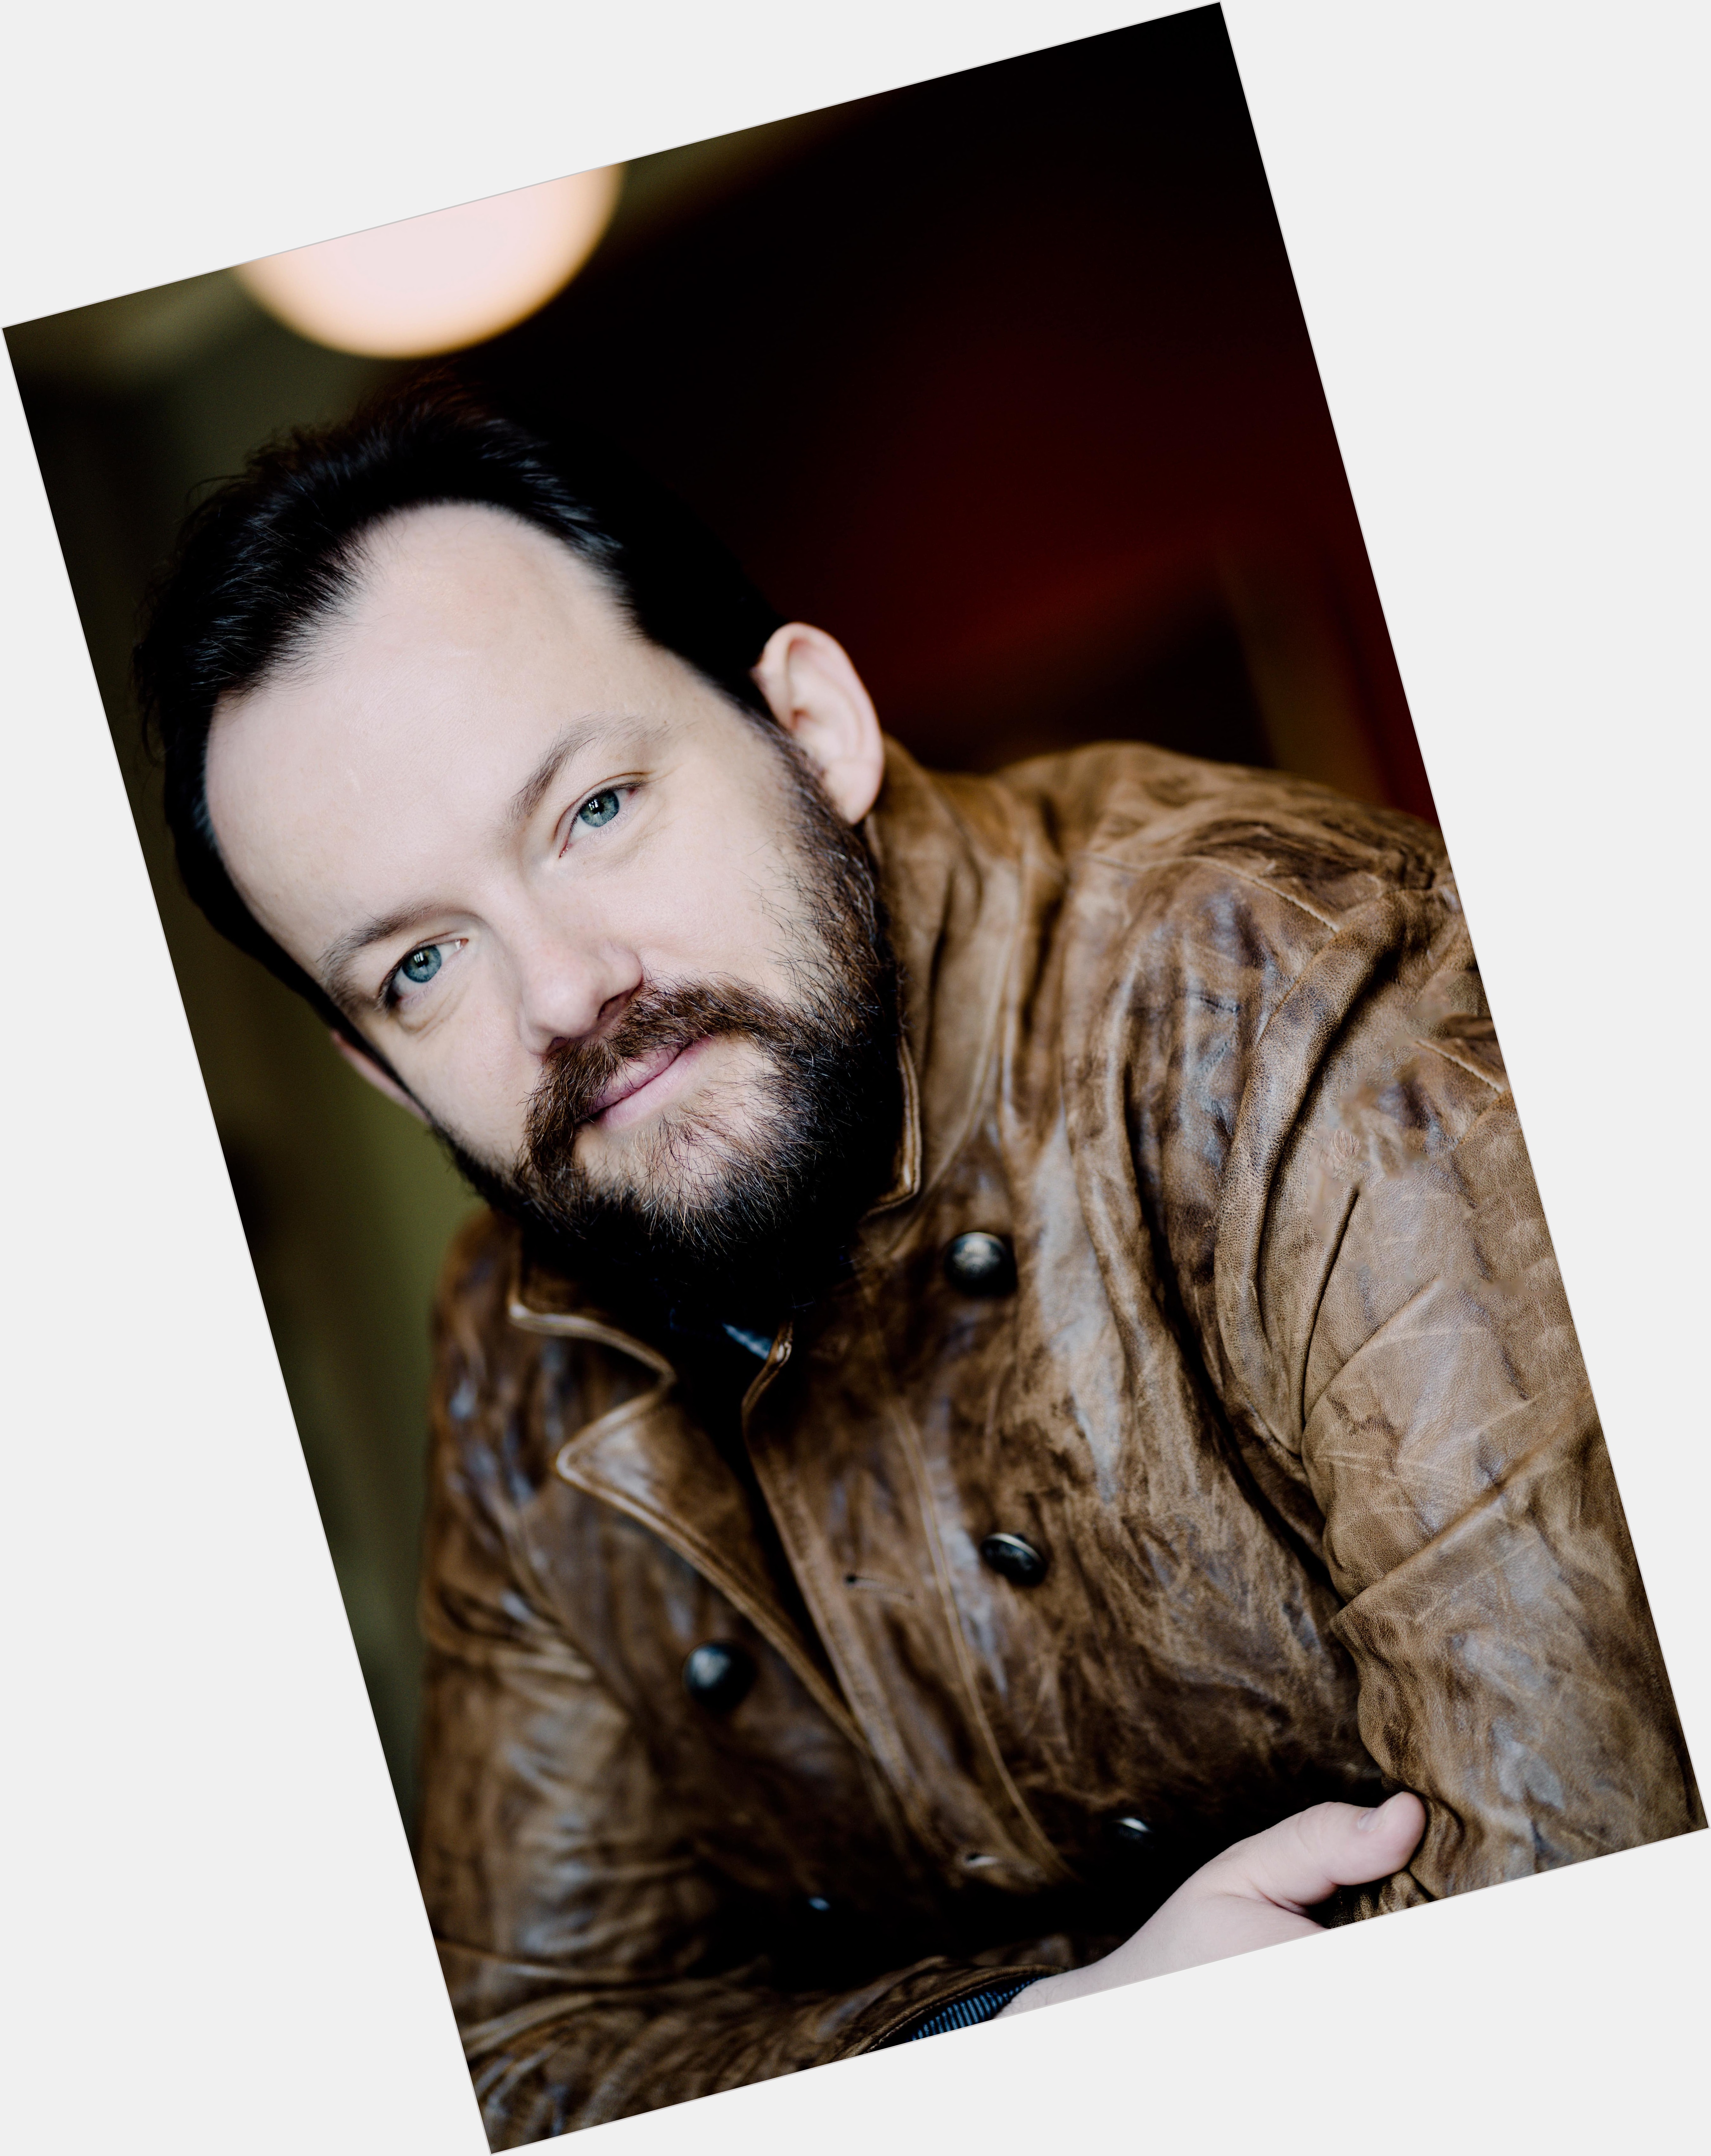 Https://fanpagepress.net/m/A/Andris Nelsons Dating 2